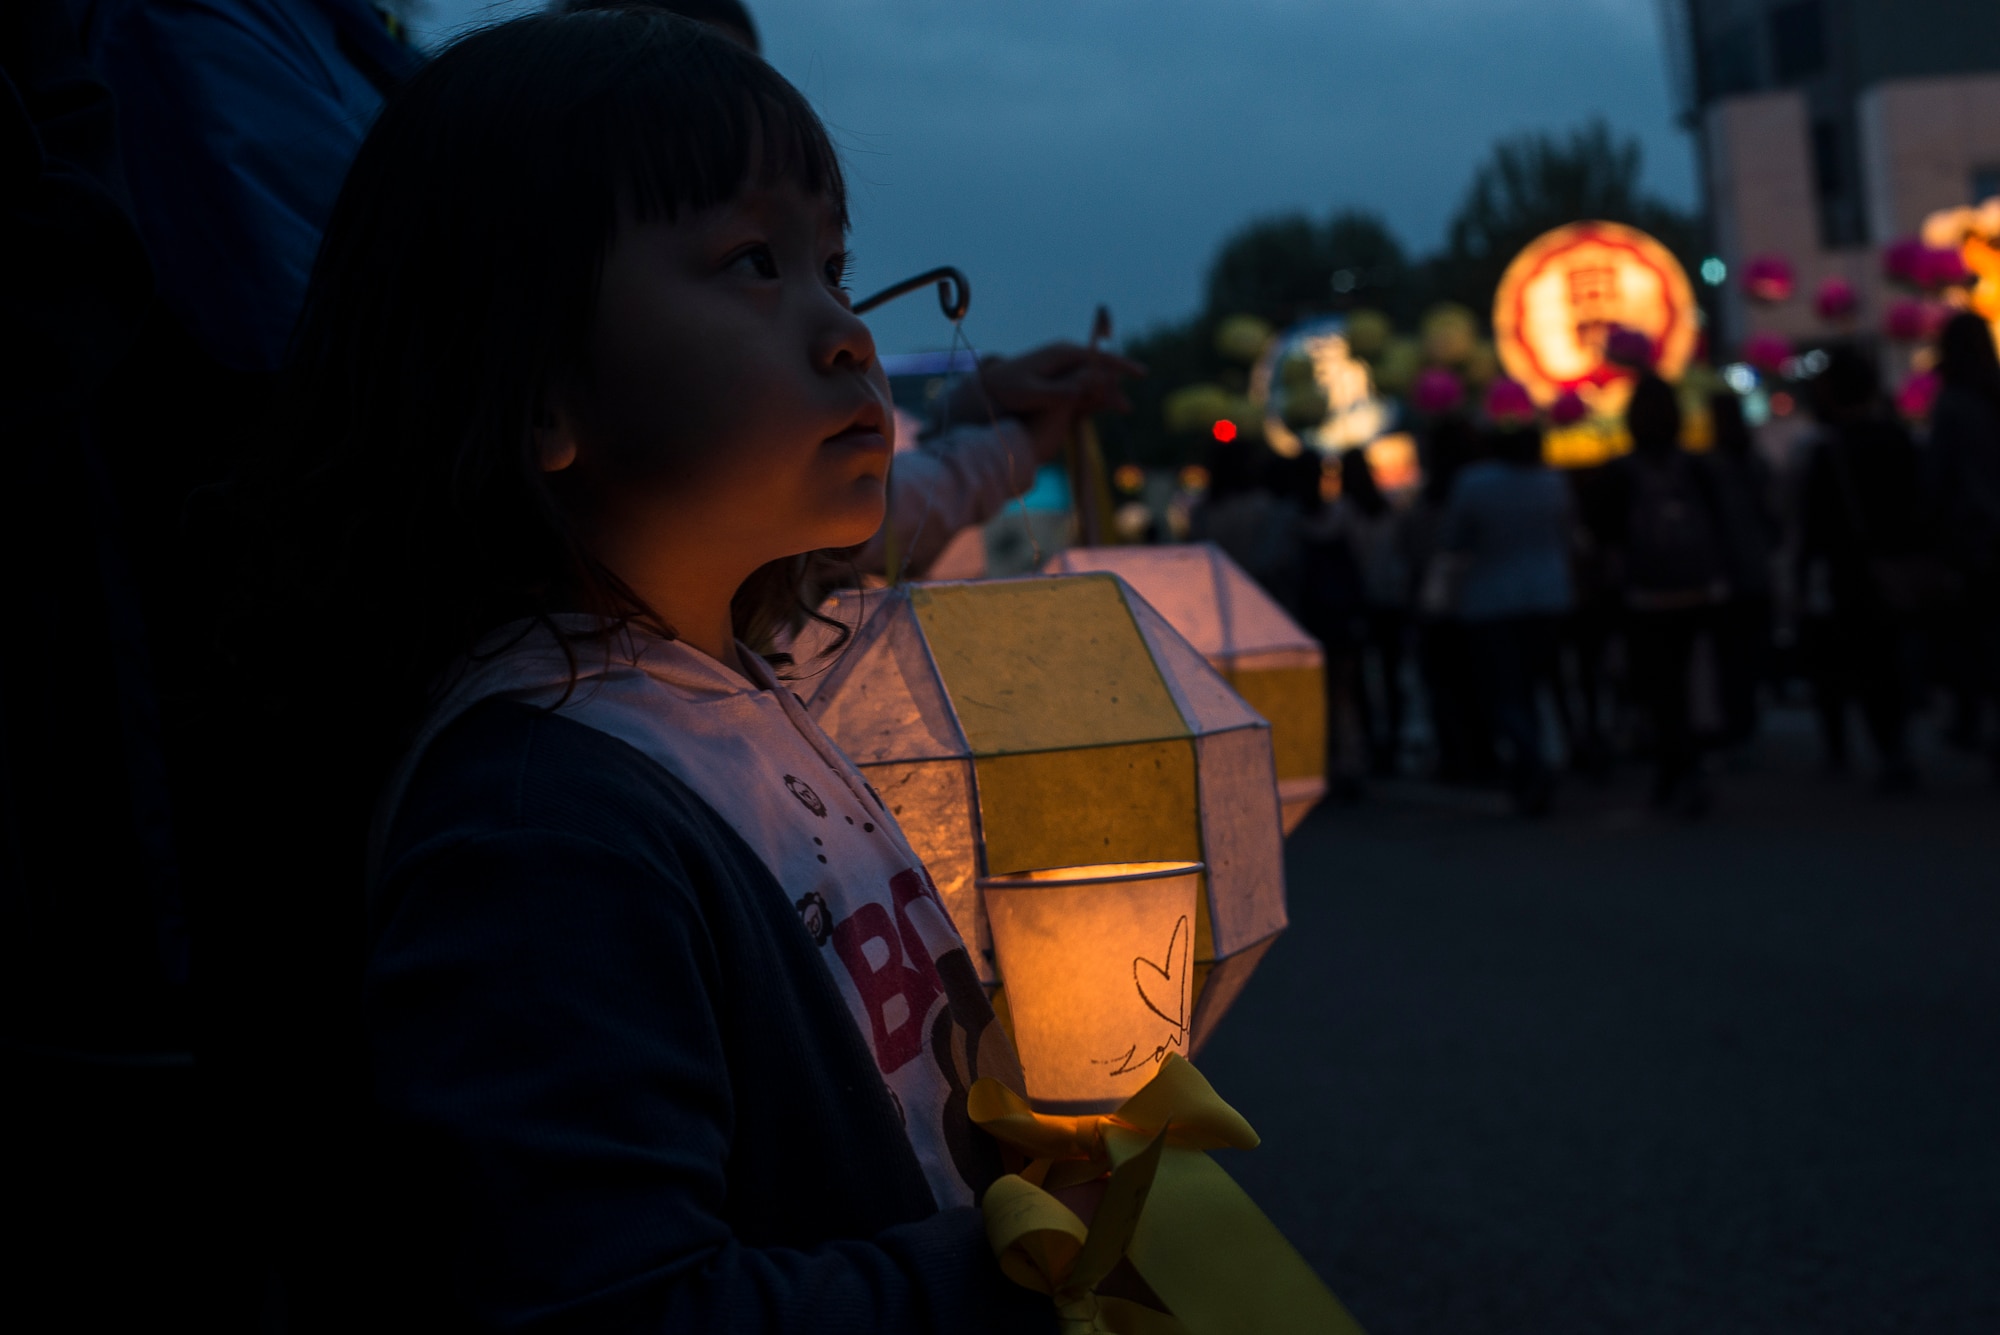 A girl holds a prayer candle while watching the Lotus Lantern Festival April 26, 2014, in Seoul, Republic of Korea. Candles were lit specifically for the deceased and missing aboard the passneger ferry Sewol, which sank off the coast of Gwanmaedo Island April 15. (U.S. Air Force photo by Staff Sgt. Jake Barreiro)